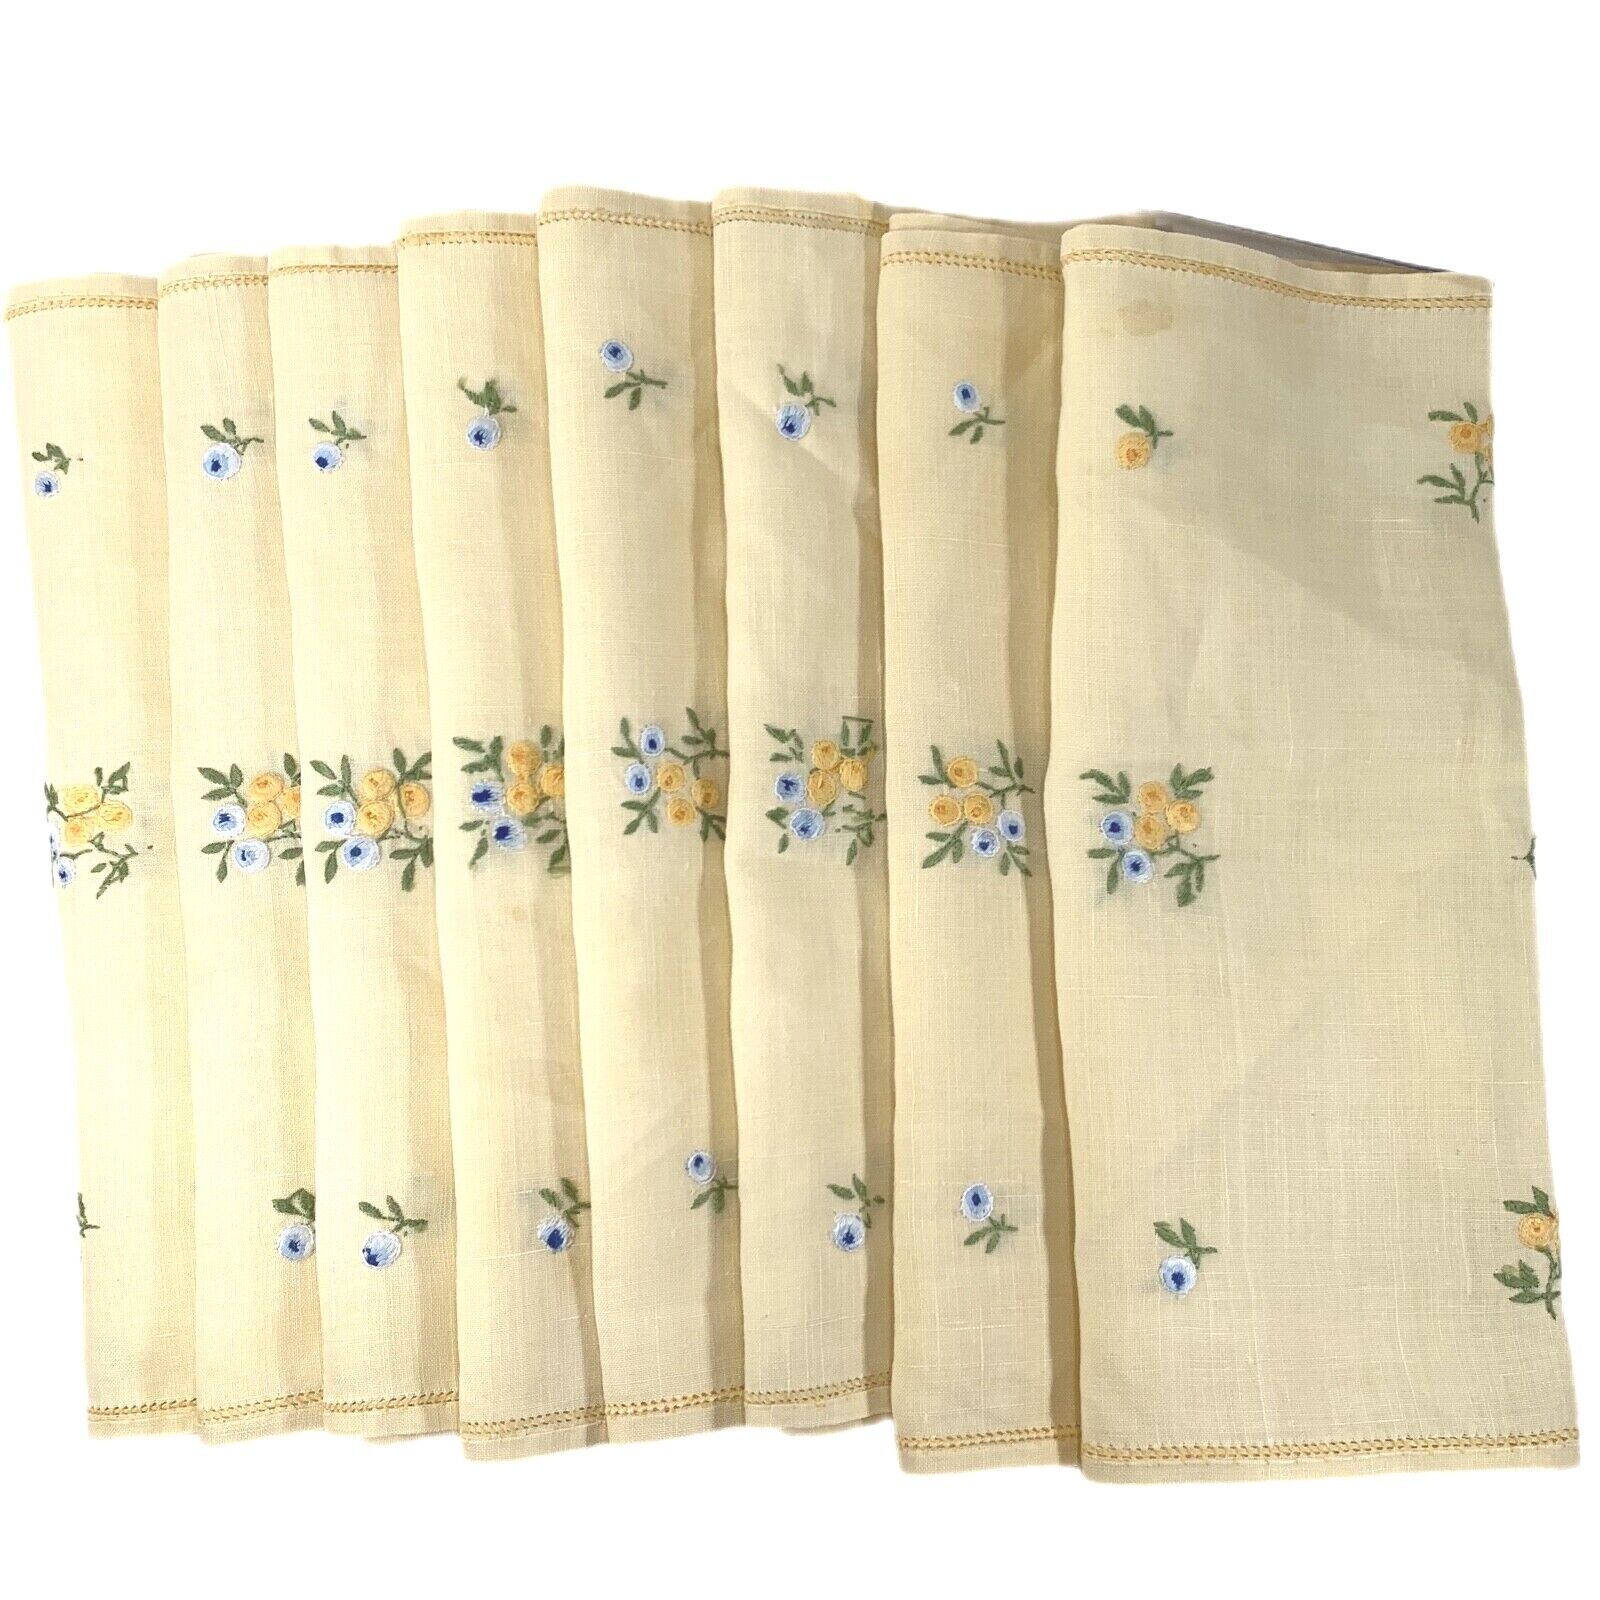 Vintage Set of 8 PLACEMATS Embroidered Table Runner Handmade Yellow Floral 9 pcs